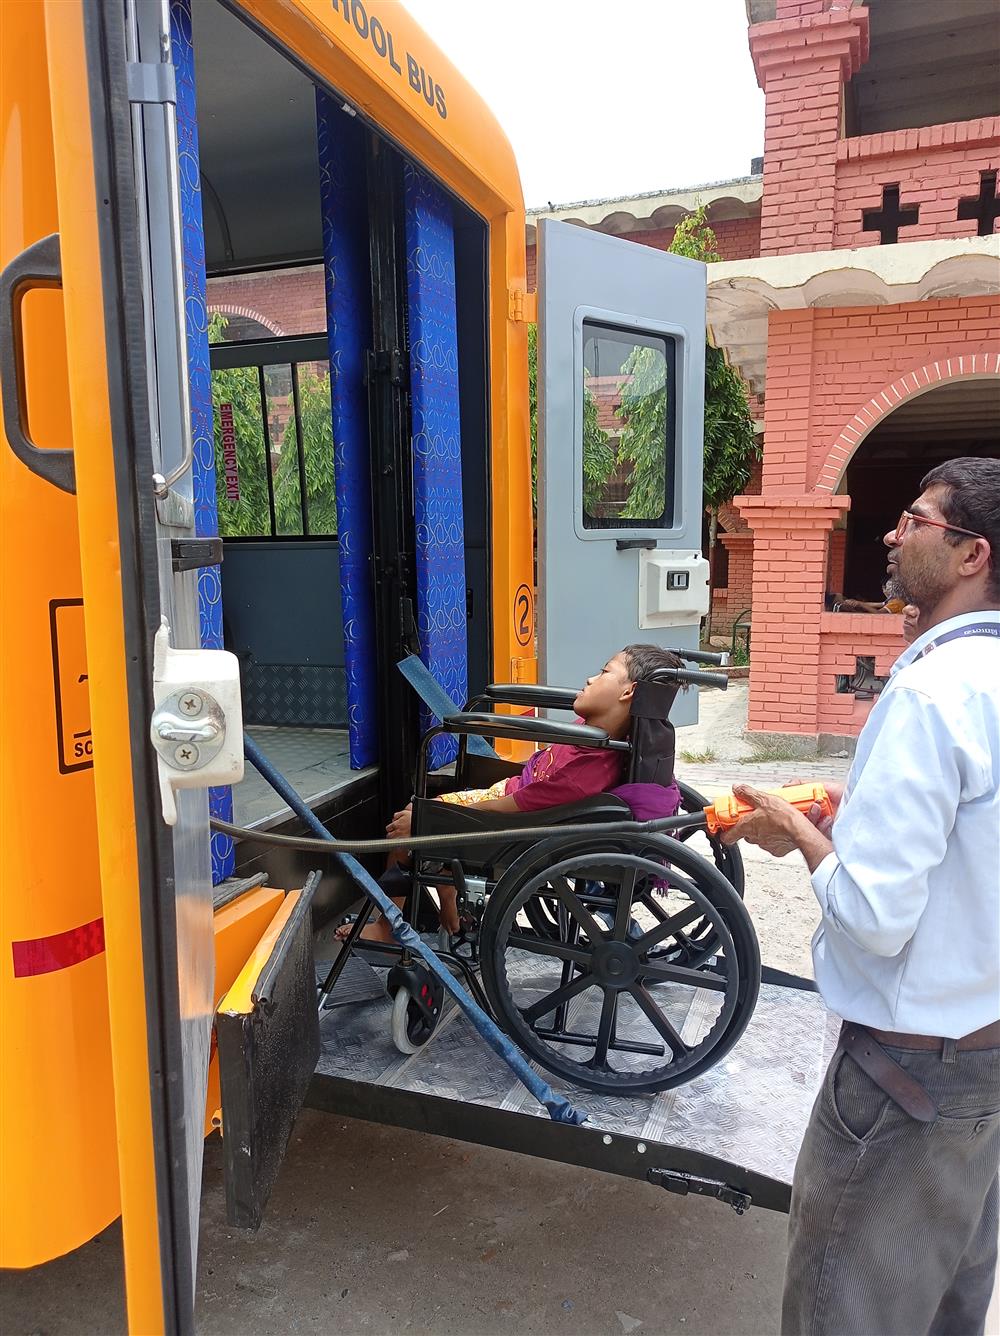 The photo shows a person in a wheelchair being assisted onto a school bus equipped with a ramp, highlighting accessibility for individuals with disabilities. A man is seen operating the ramp, ensuring the safe boarding of the wheelchair user. The bus is brightly colored, and the setting appears to be outside a building with red brickwork. This image reflects a commitment to inclusivity and the importance of providing equal opportunities for mobility and education to all members of society.